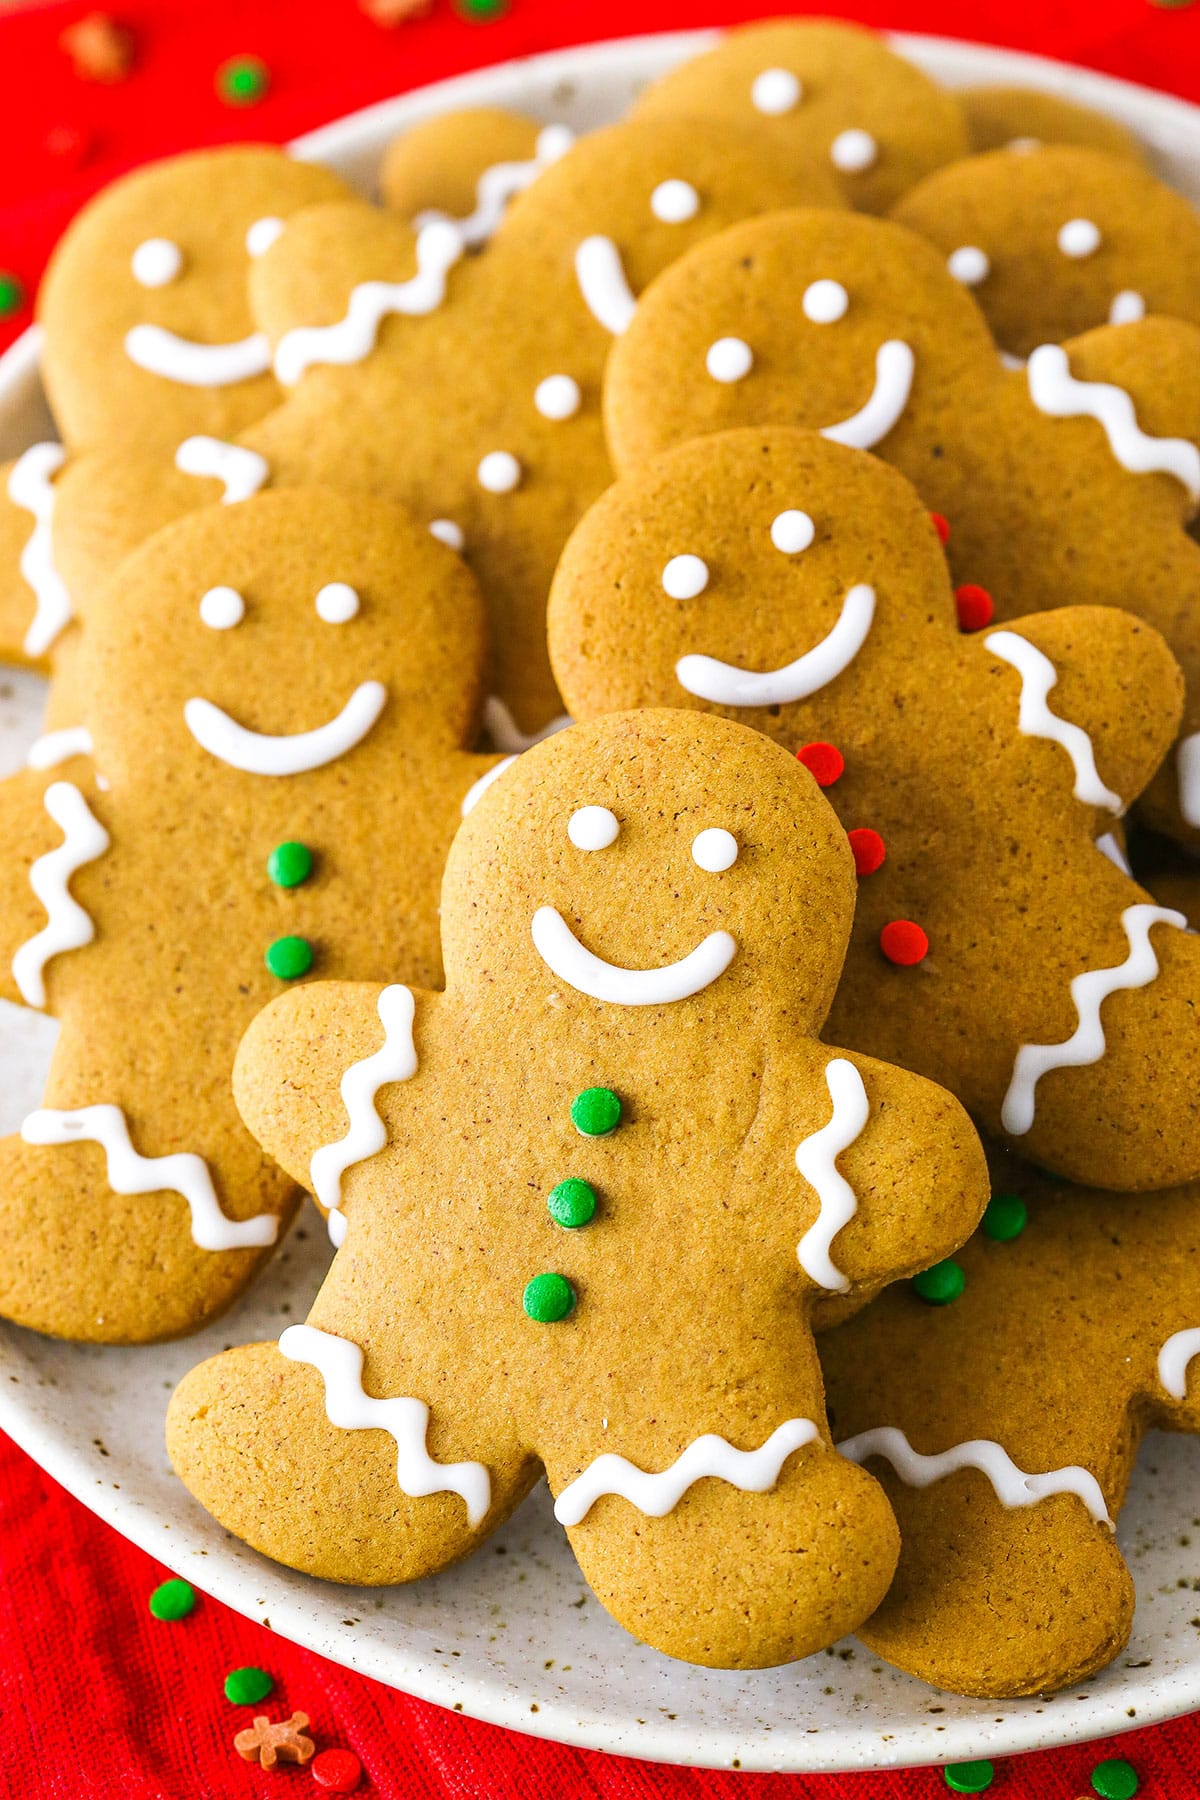 Gingerbread Cookies decorated with white, green and red frosting layered on a white plate